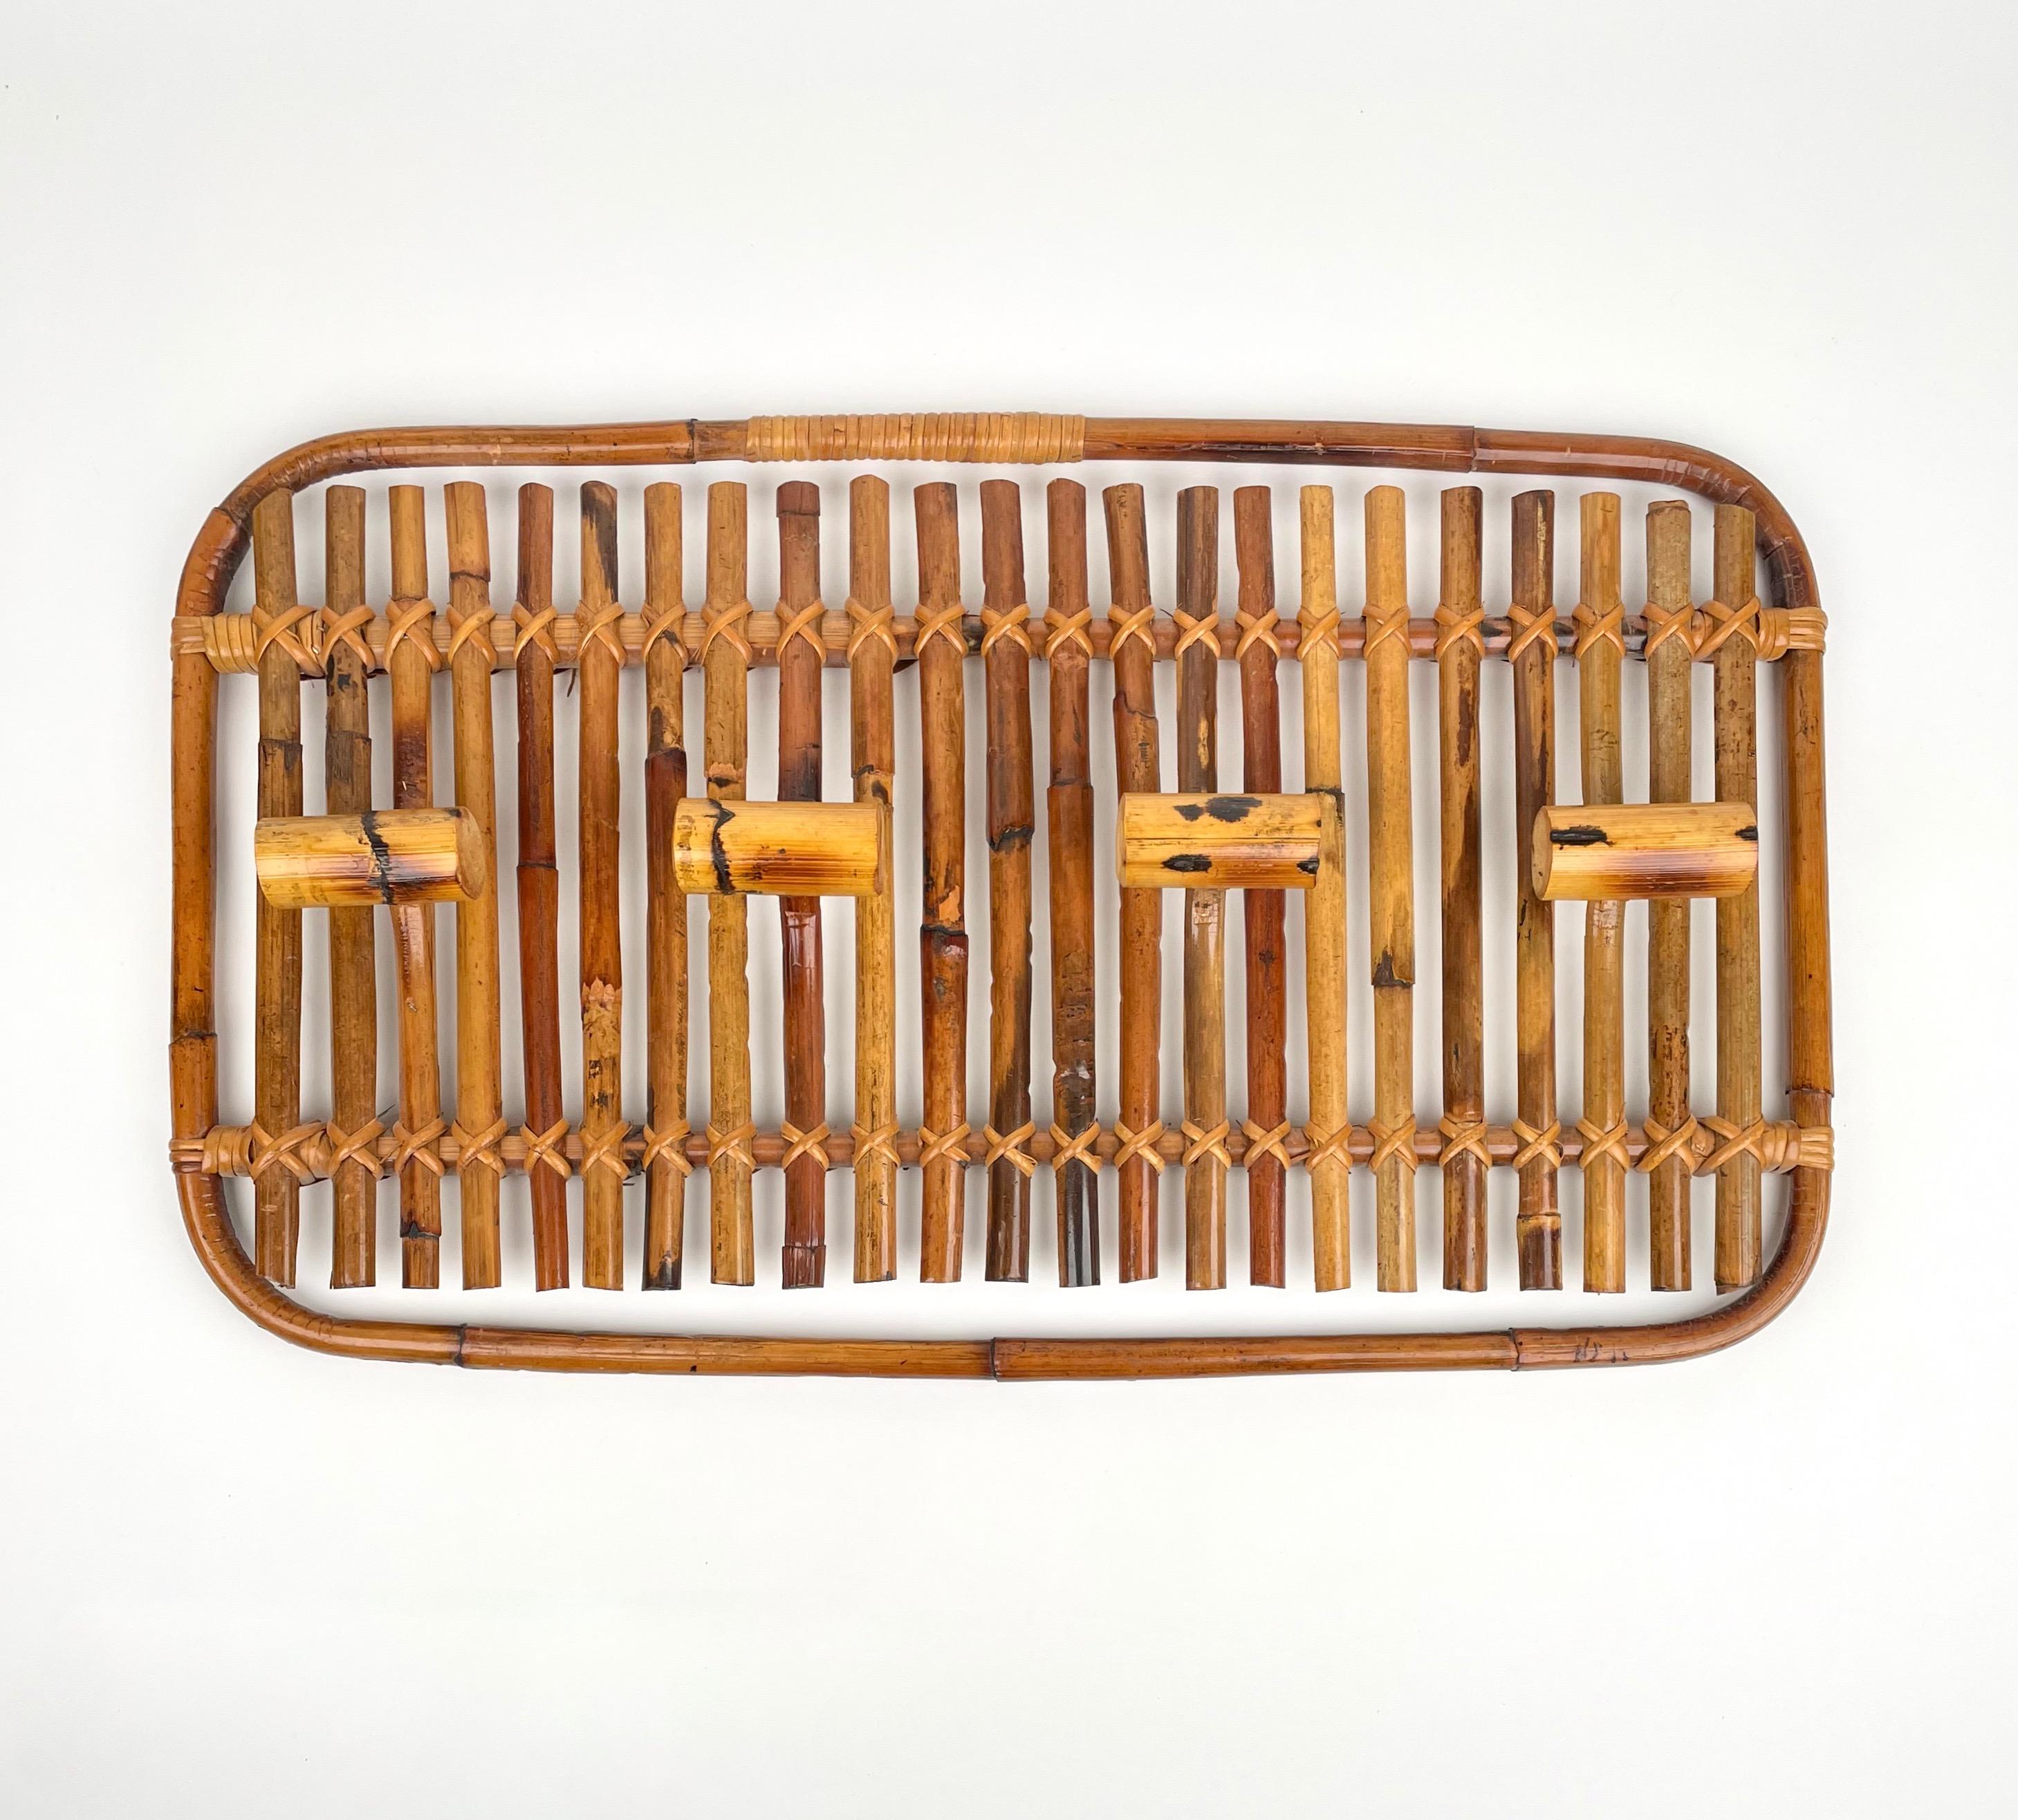 Big rectangular coat hanger with rounded corners in bamboo and rattan featuring four hooks. Made in Italy in the 1960s.